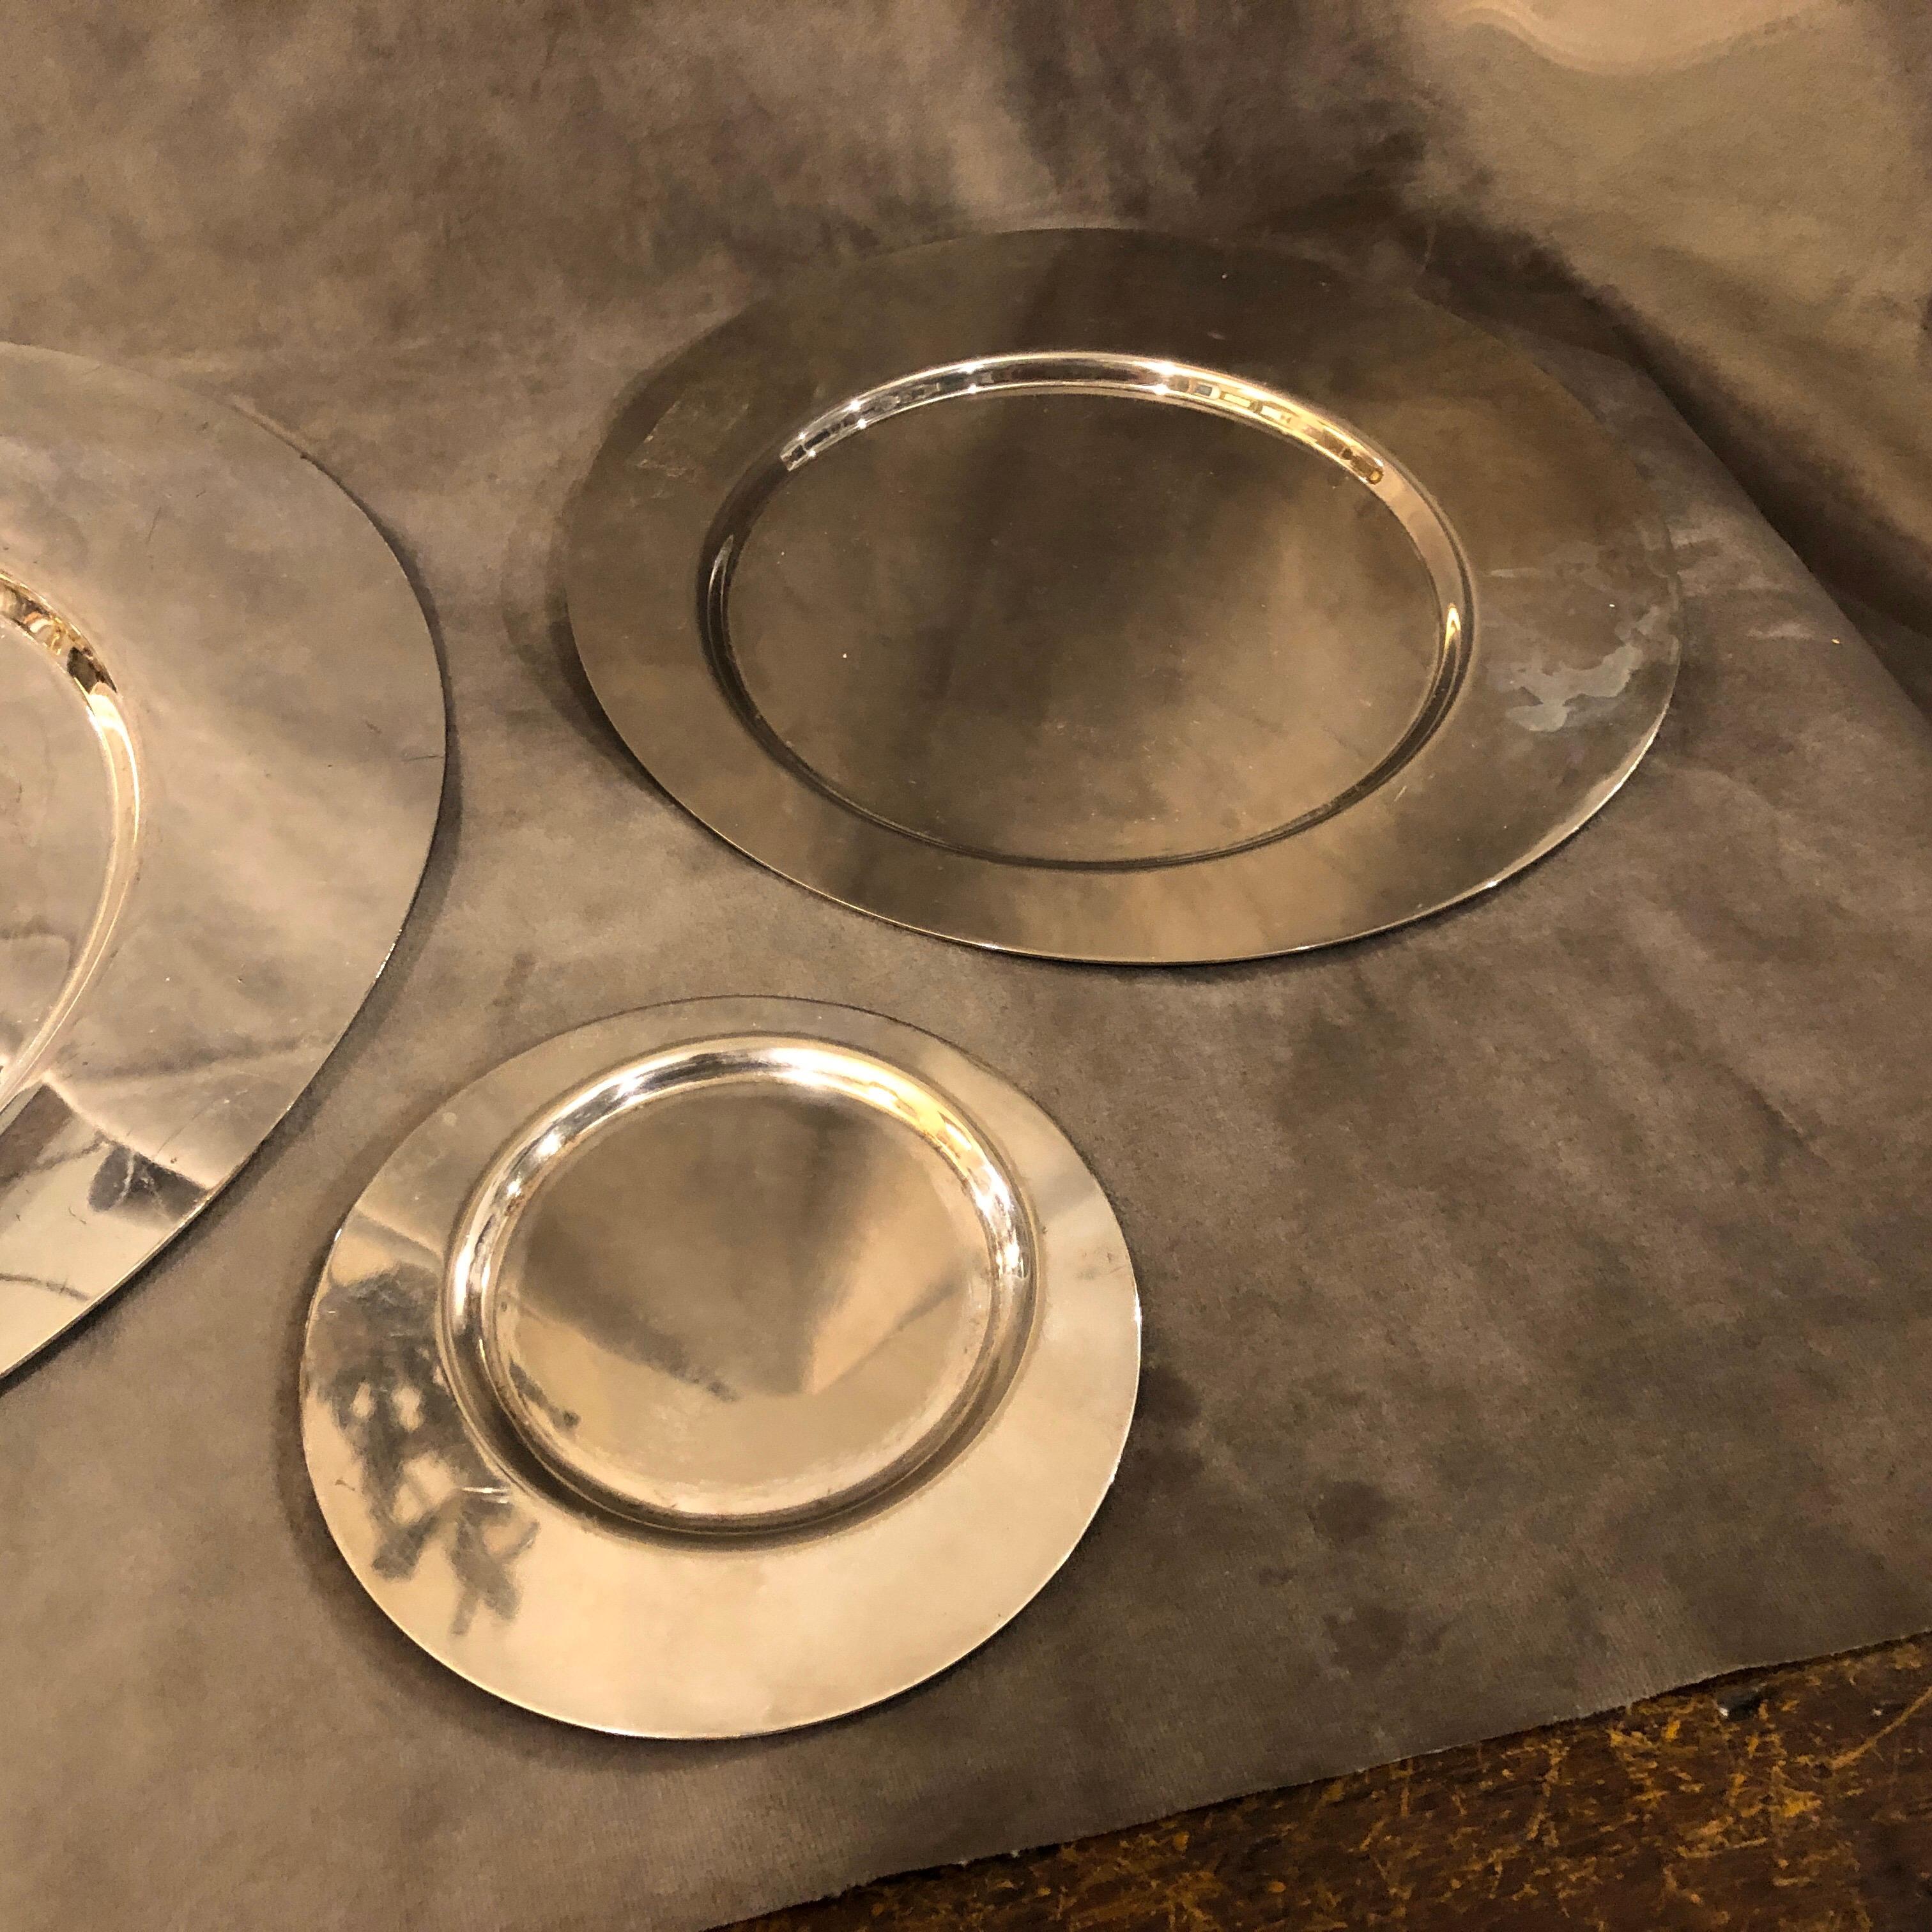 A Gio Ponti set of three plates made for Cleto Munari, signed on the bottom, good conditions overall, Dimension of the medium one diameter cm 22, dimension of the small one diameter cm 13.